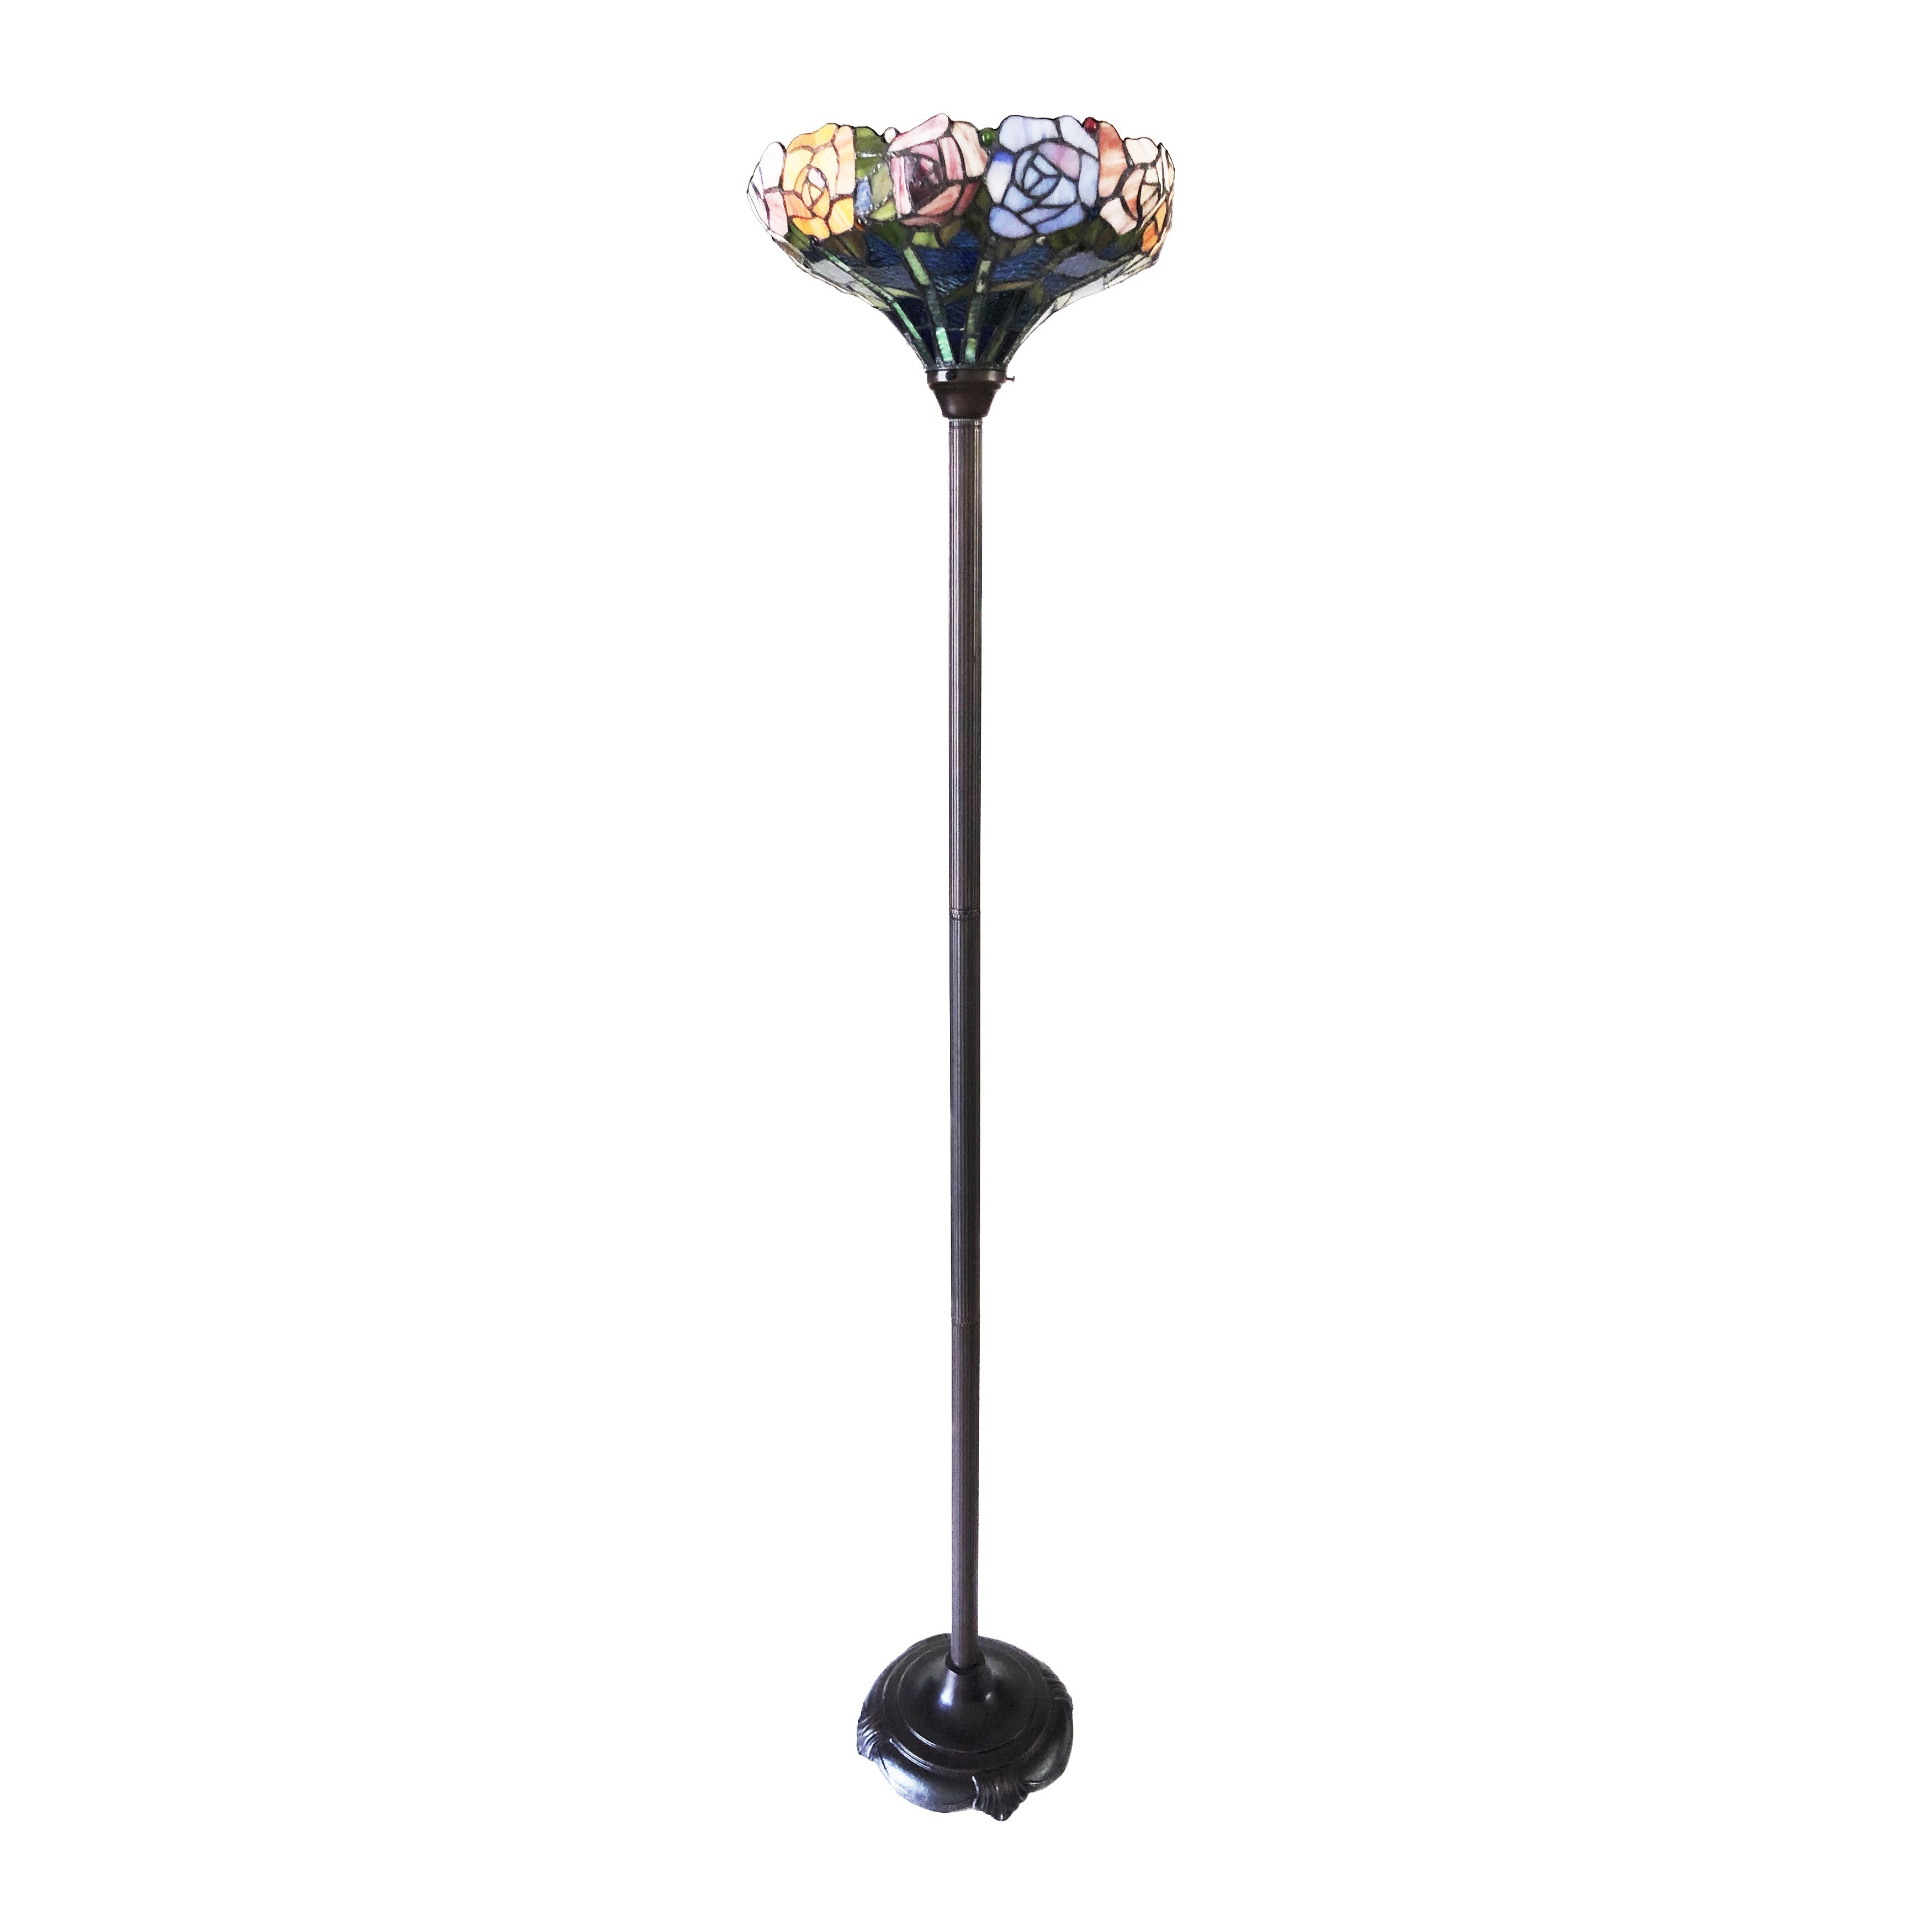 RADIANCE Goods -Style Floral Stained Glass Torchiere Floor Lamp 67" Height